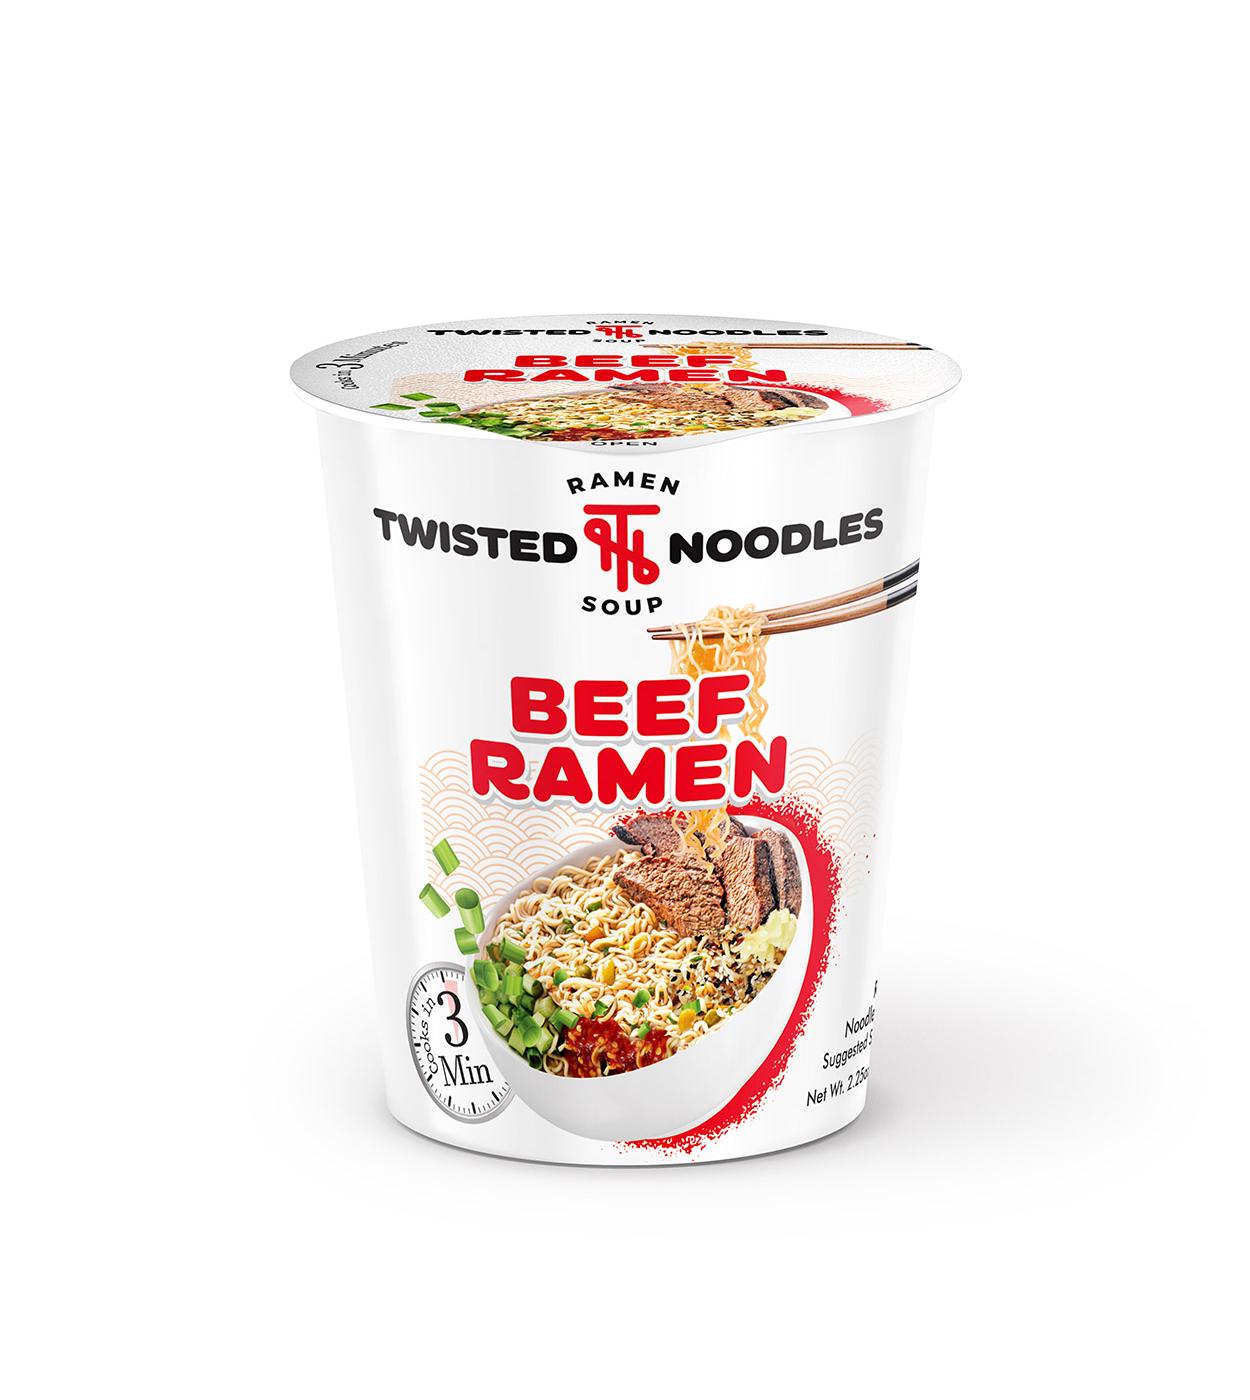 Twisted Noodles Beef Ramen Soup Cup; image 1 of 2